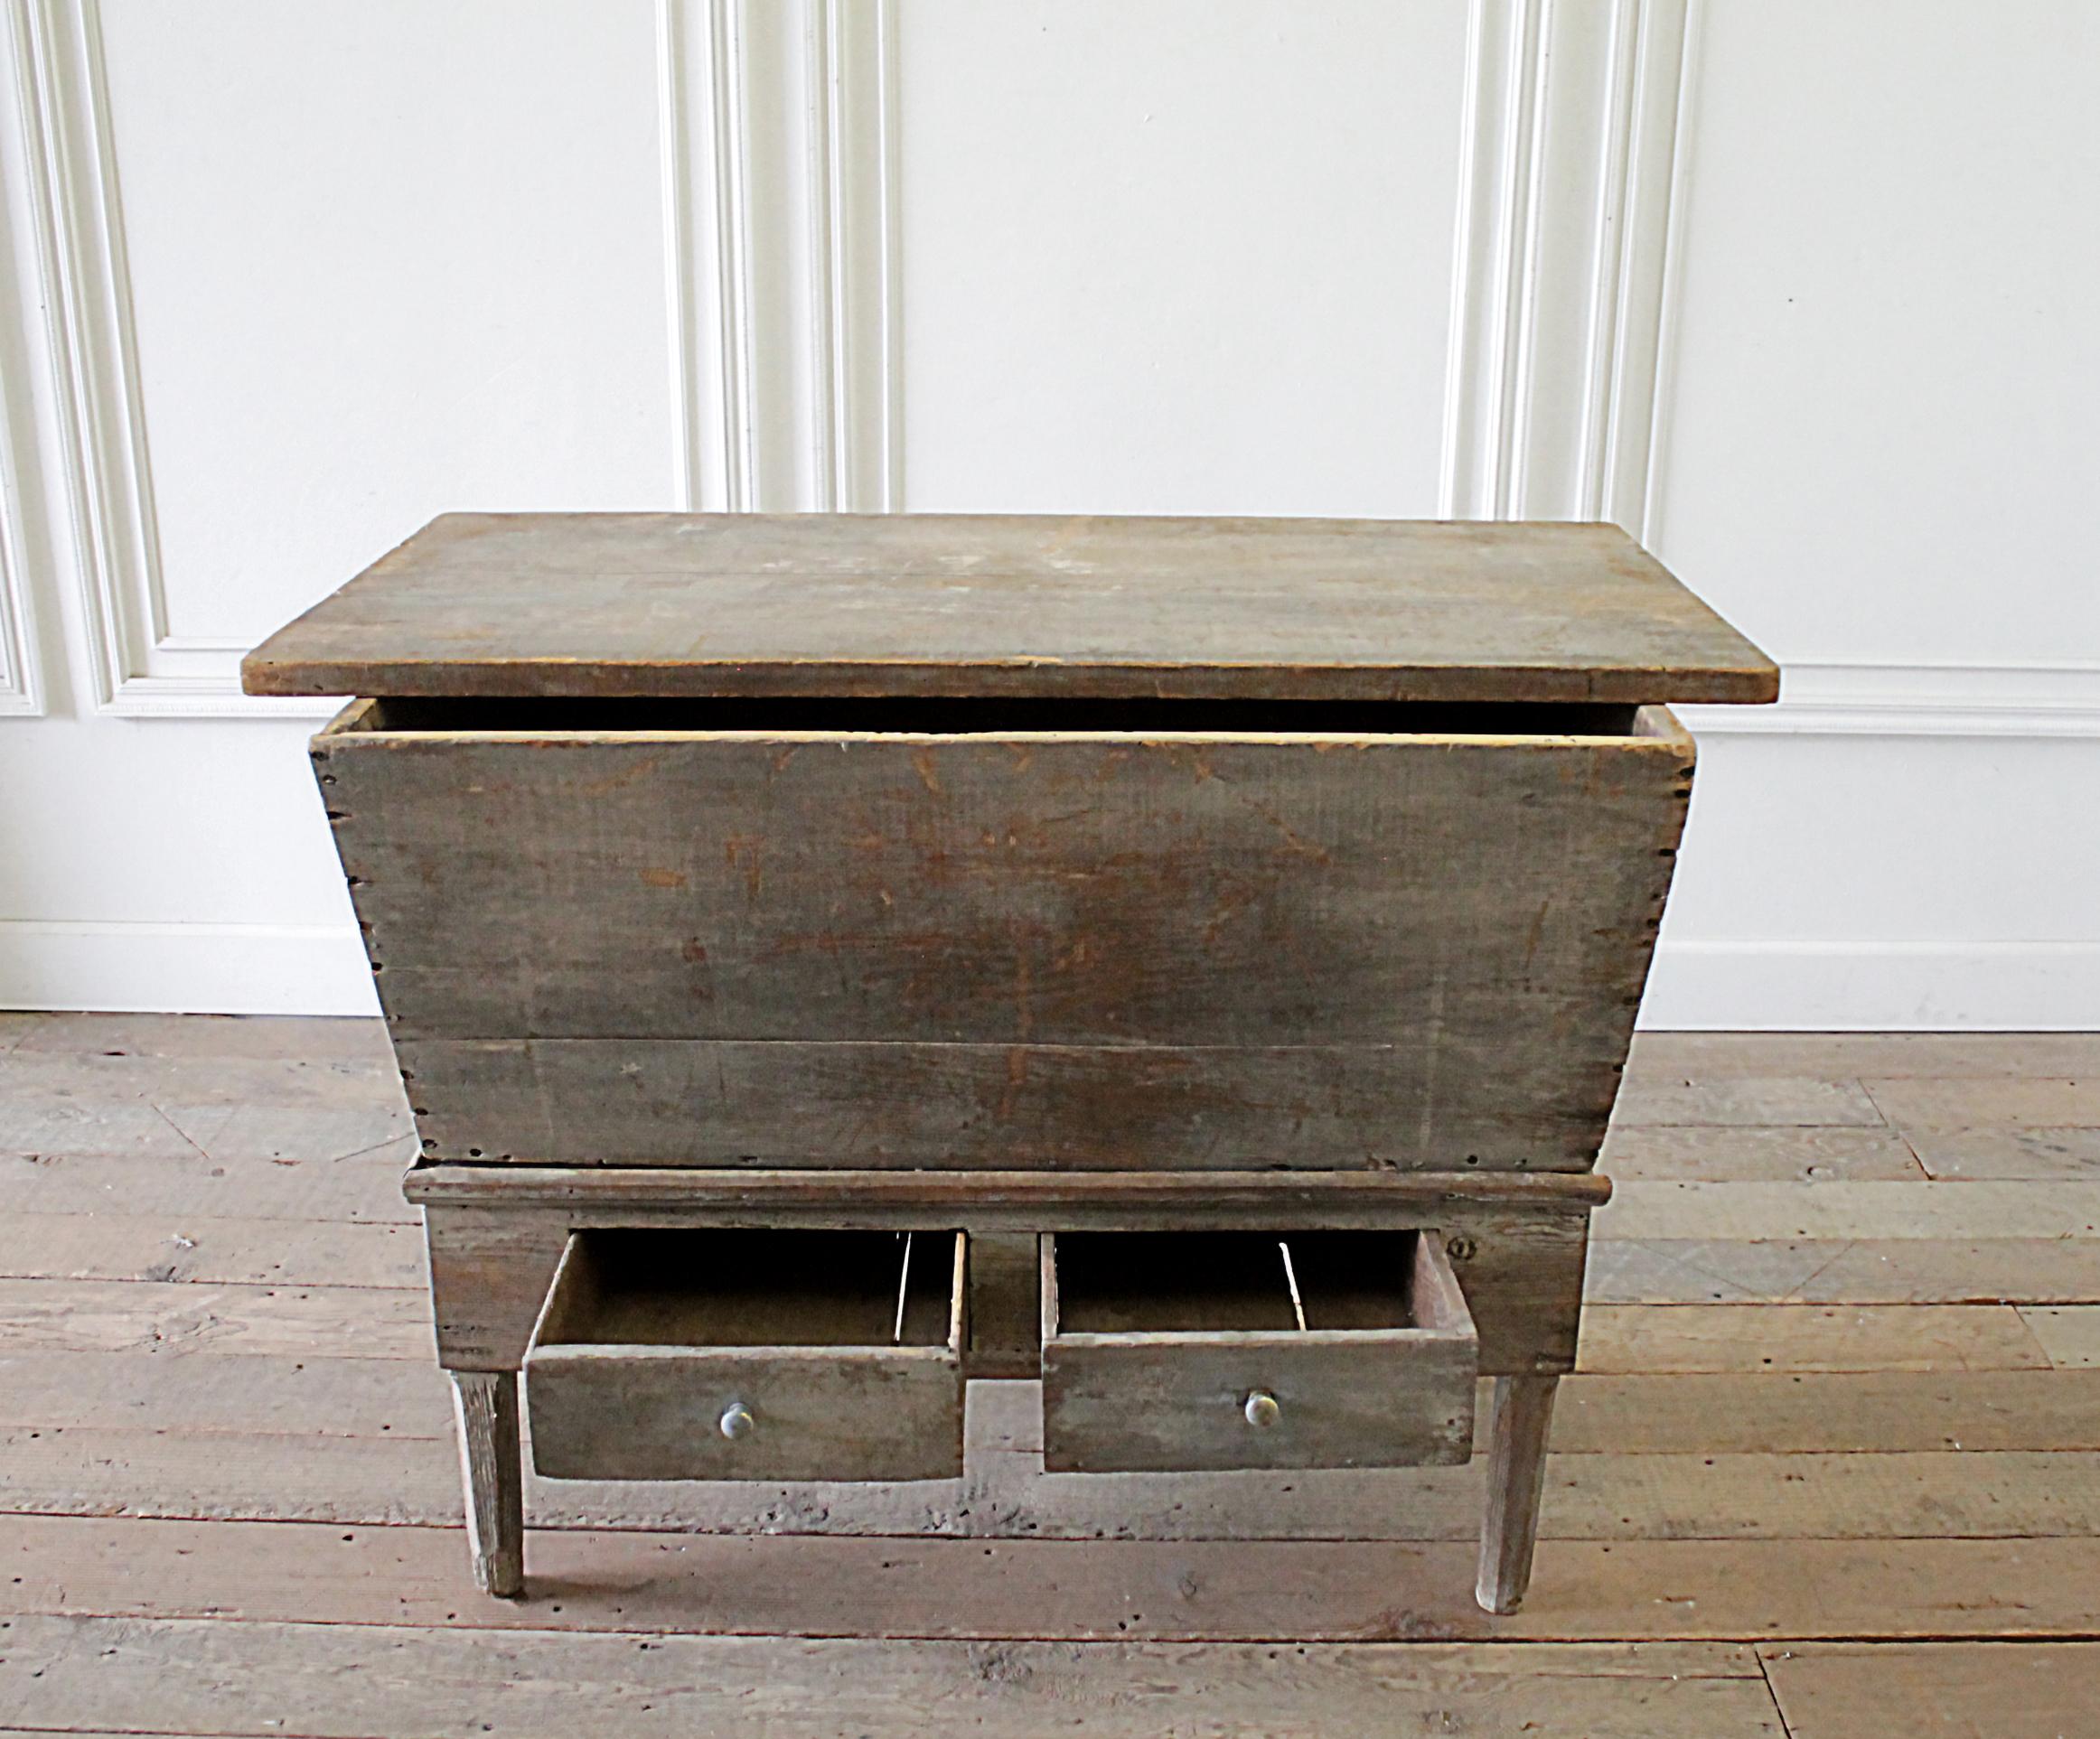 Antique primitive country dough bin server table
Beautiful patina in a grey-blue color rubbed away to show natural wood tones. Original painted patina. This was a storage to house bread, bread doughs. The top is not attached, it does come off the